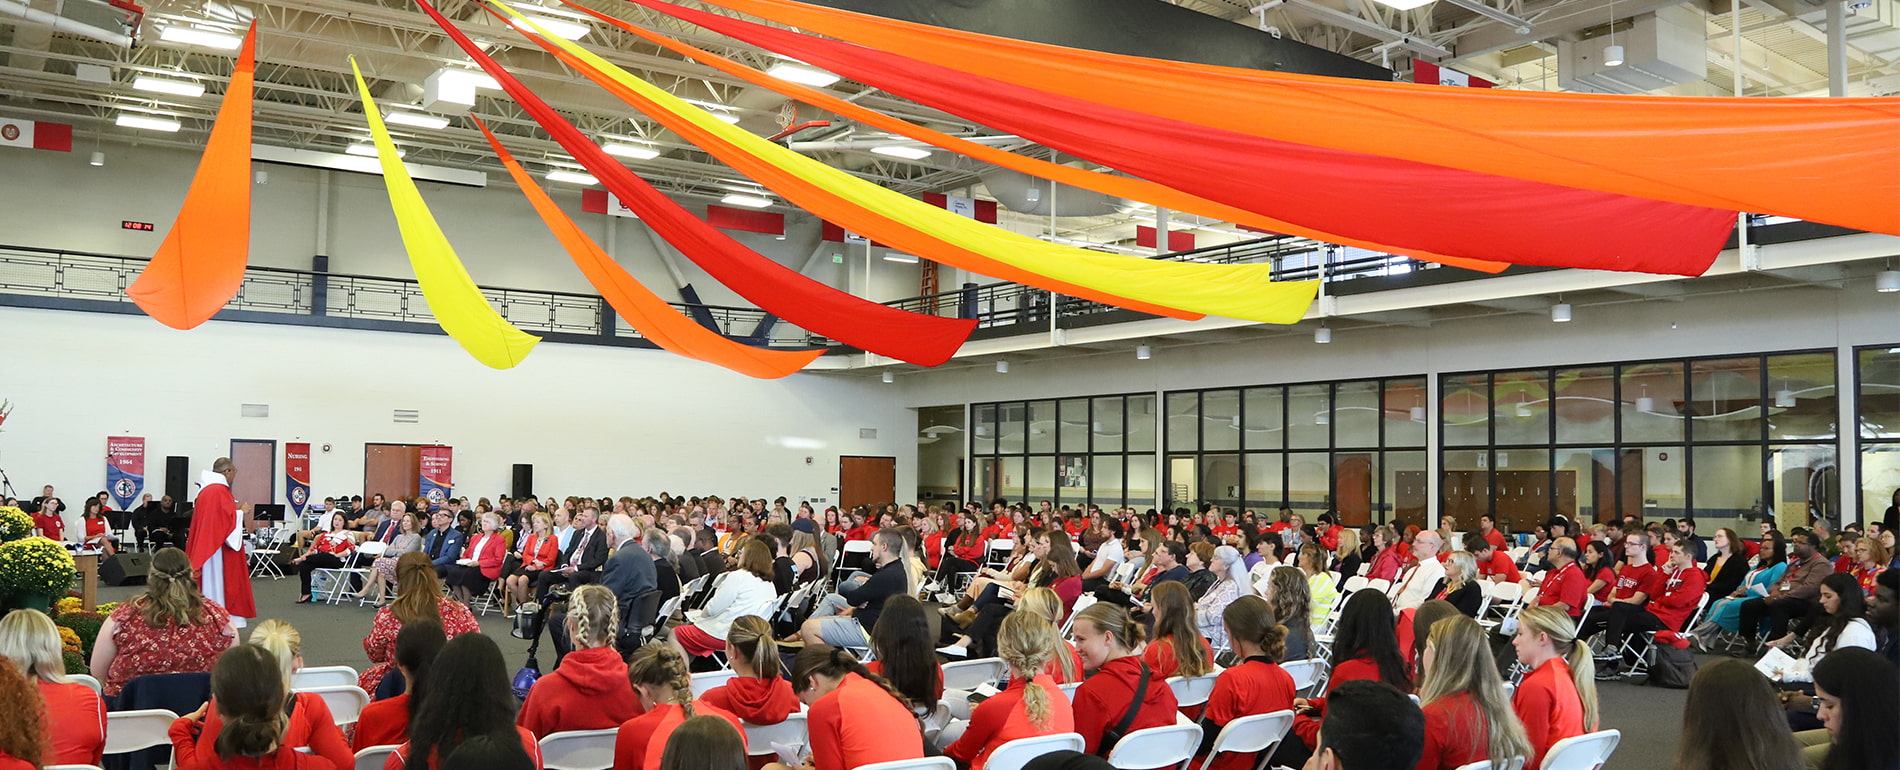 Dozens of people, in reds and orange and other colors, sit and listen during Celebrate Spirit inside of the Student Fitness Center. Large orange, red and yellow ribbons hang above.